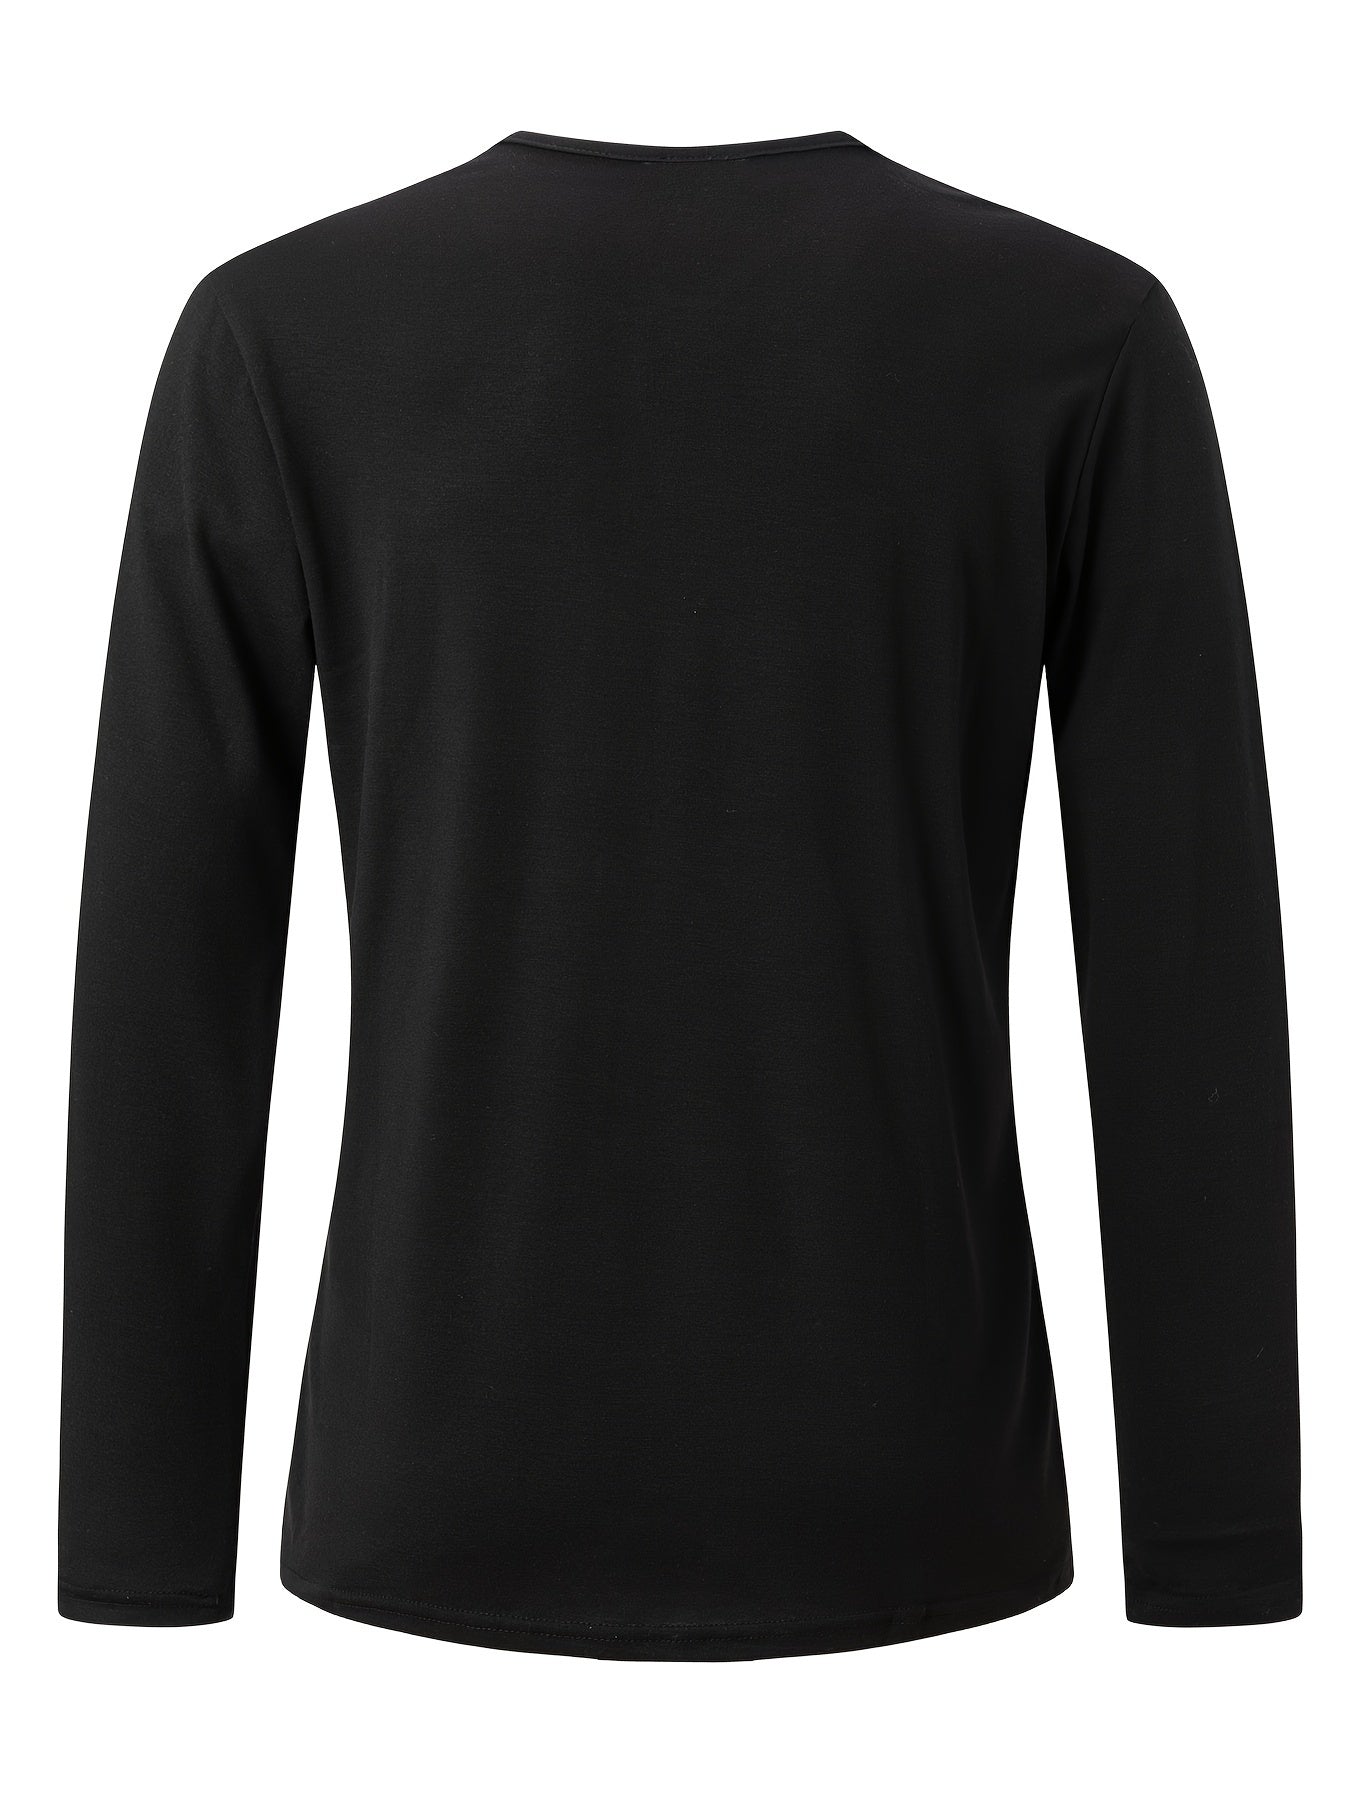 Spring Fall Men's Top, Casual Solid Men's Long Sleeve Henley Tee With Sweetheart Neckline